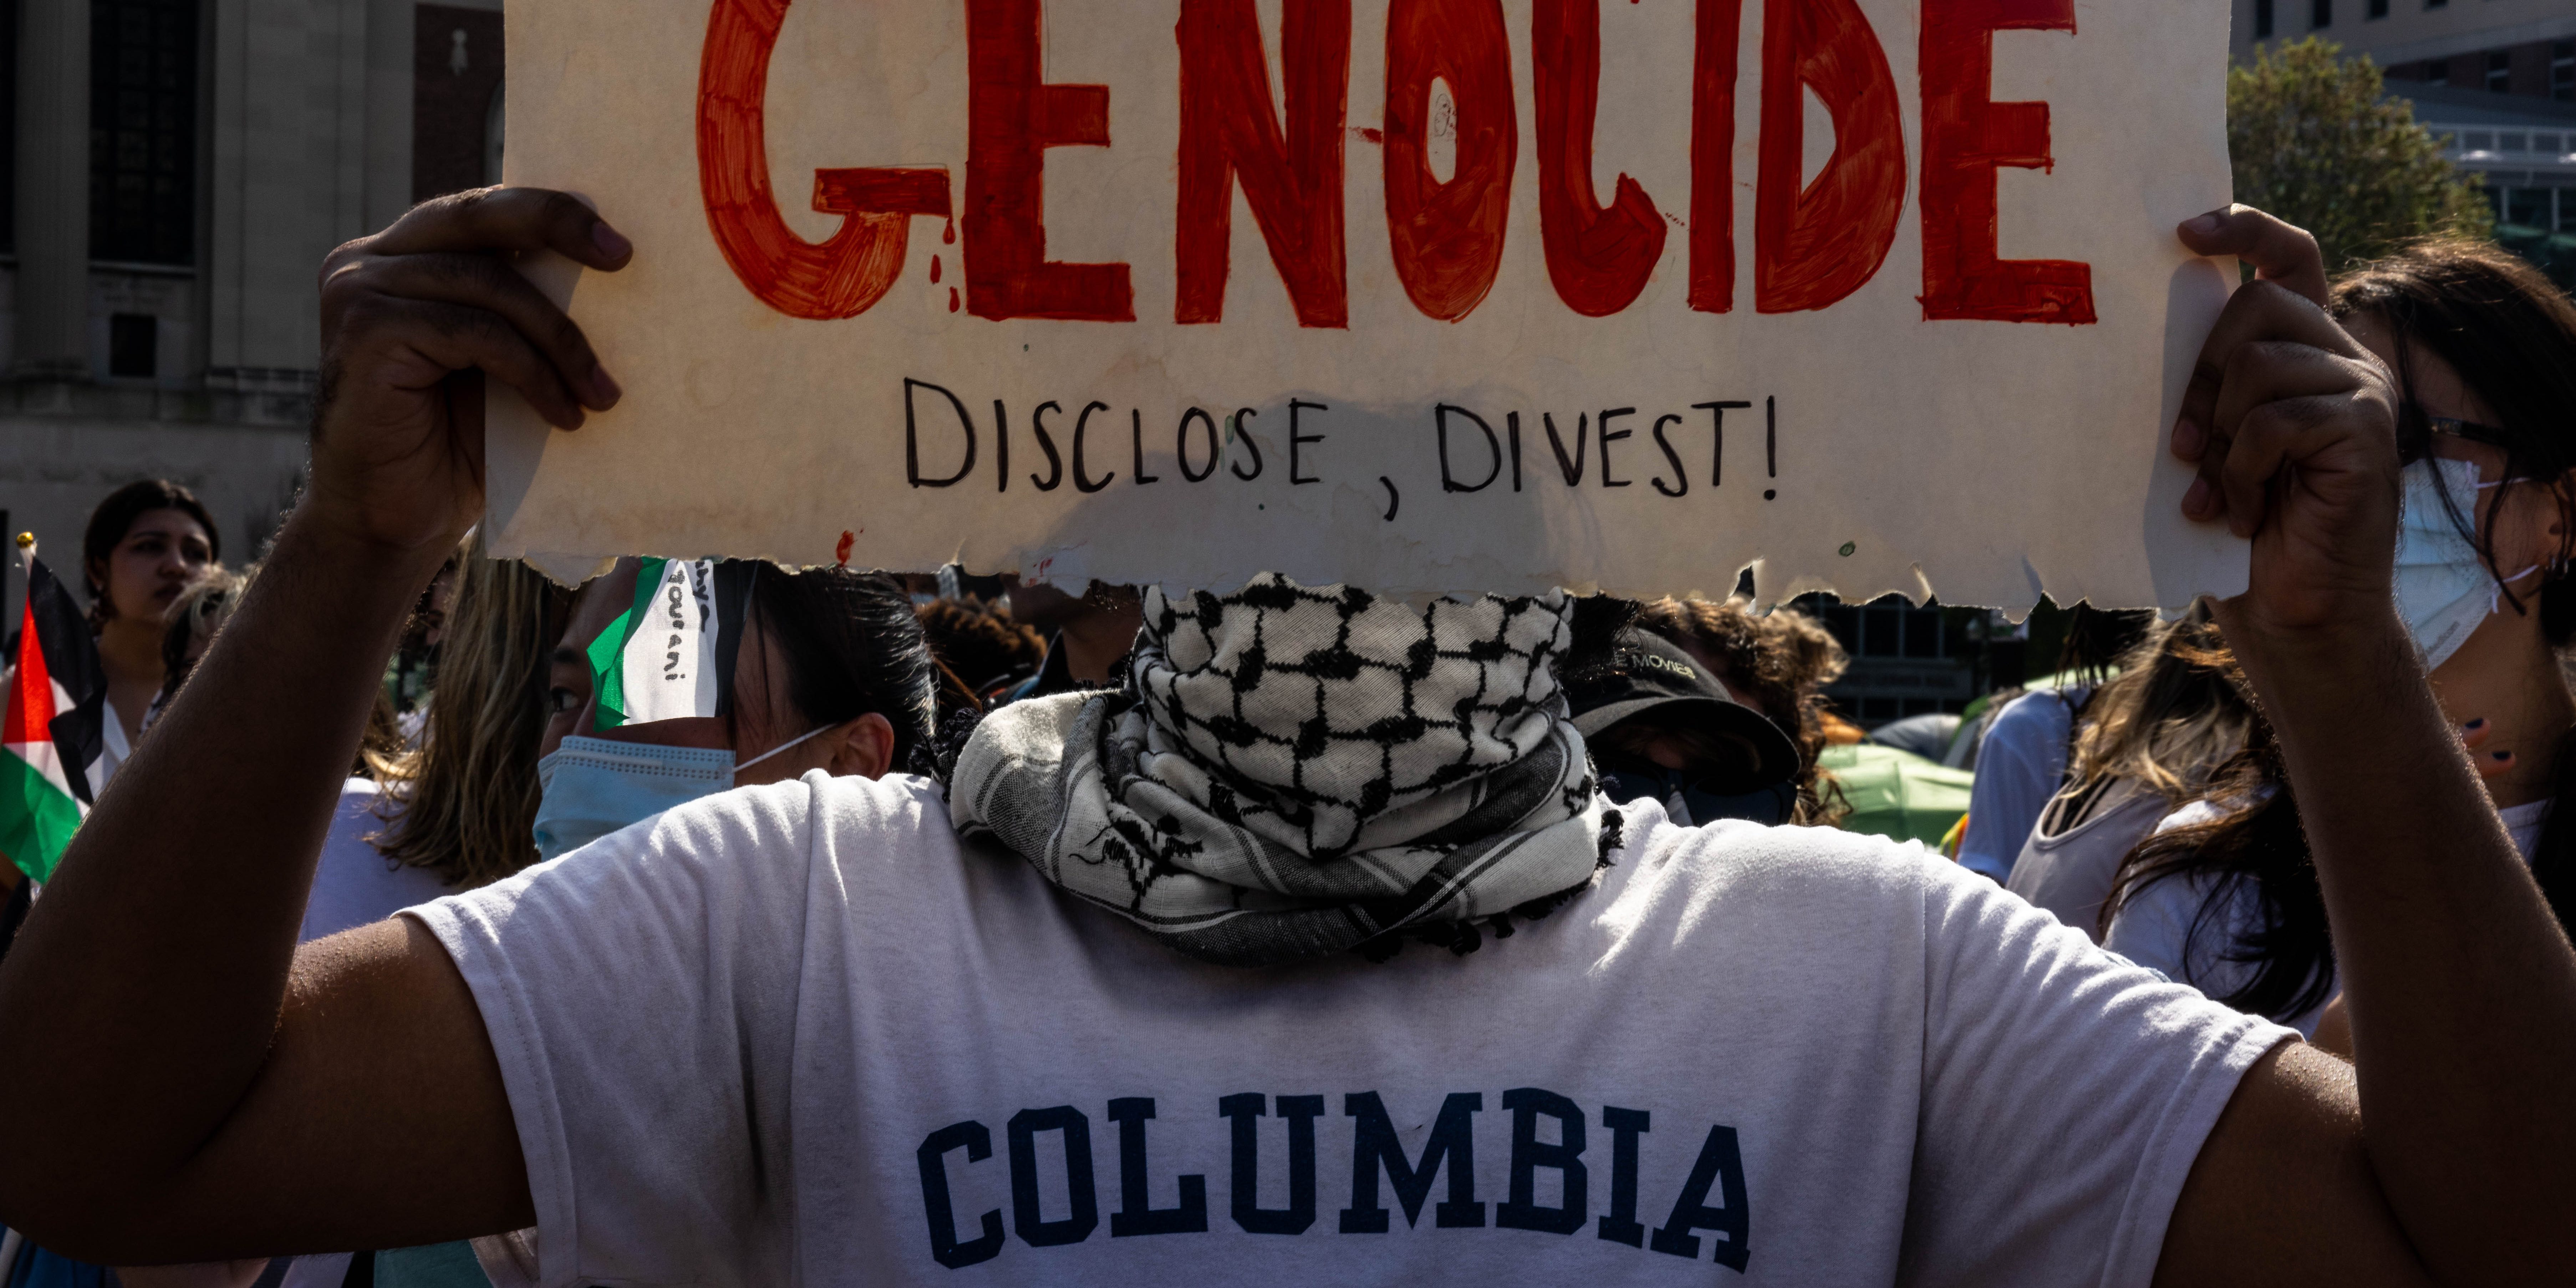 NEW YORK, NEW YORK - APRIL 29: A demonstrator protests outside the encampment established in support of Palestinians in Gaza at Columbia University on April 29, 2024 in New York City. Pro-Palestinian demonstrators marched as a 2 p.m. deadline to clear the encampment given to students by the university came and went. The students were given a suspension warning if they did not meet the deadline. Students at Columbia were the first from an elite college to erect an encampment, demanding that the school divest from Israel amid the Israel-Hamas war, in which more than 34,000 Palestinians have been killed in the Gaza Strip.  (Photo by Alex Kent/Getty Images) This happened hours after protestors were told to voluntarily disperse from the area or face suspensions.